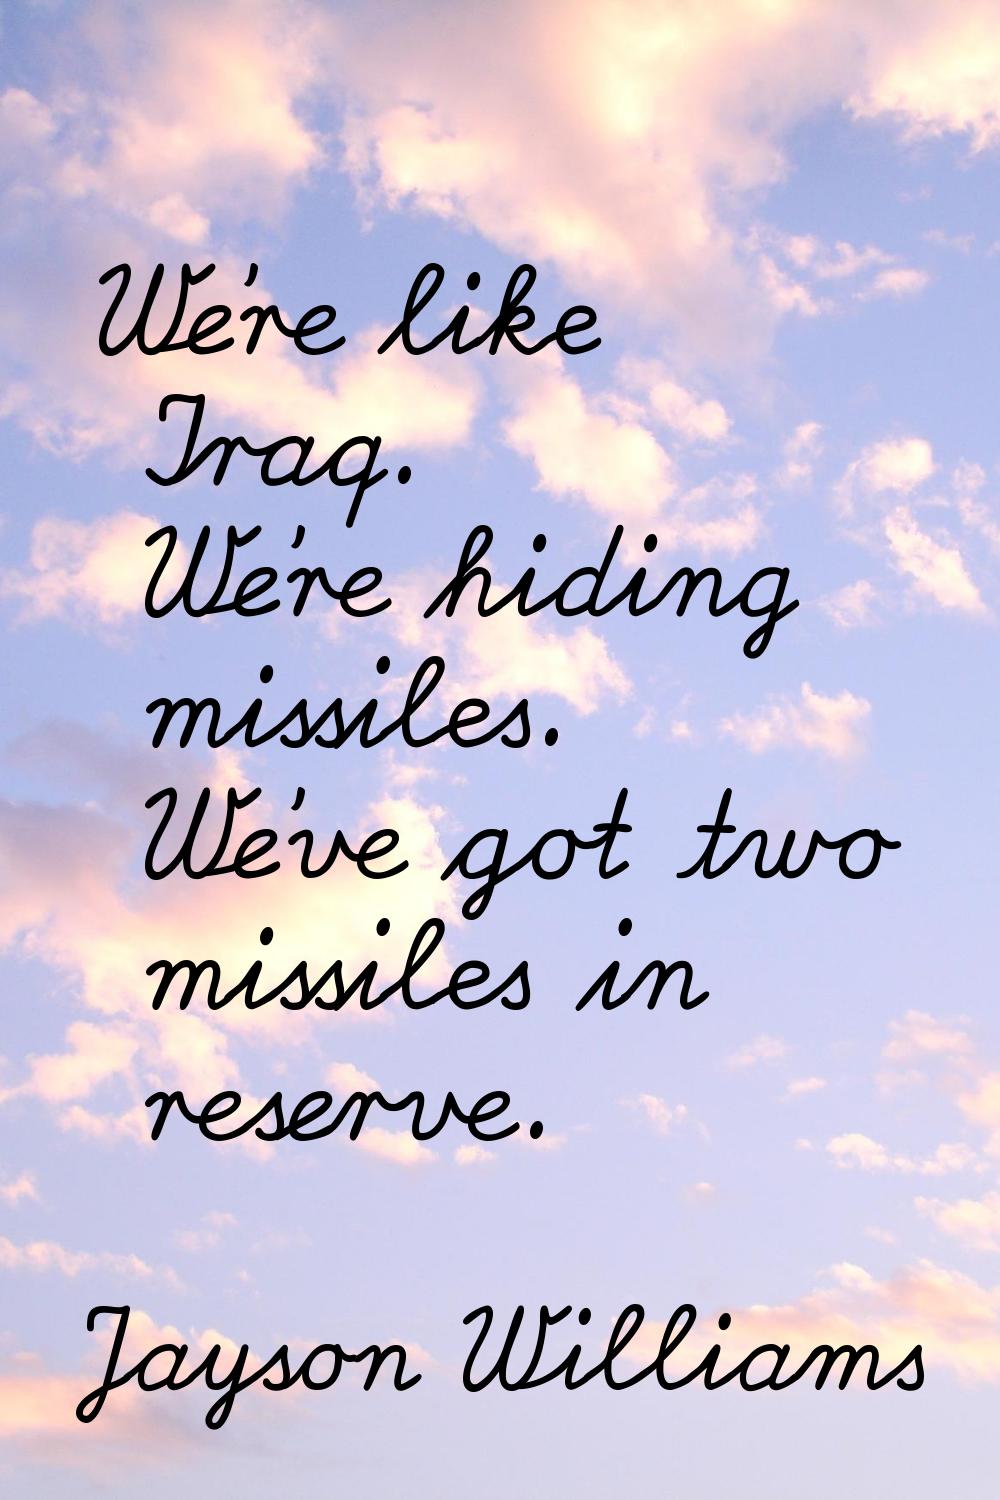 We're like Iraq. We're hiding missiles. We've got two missiles in reserve.